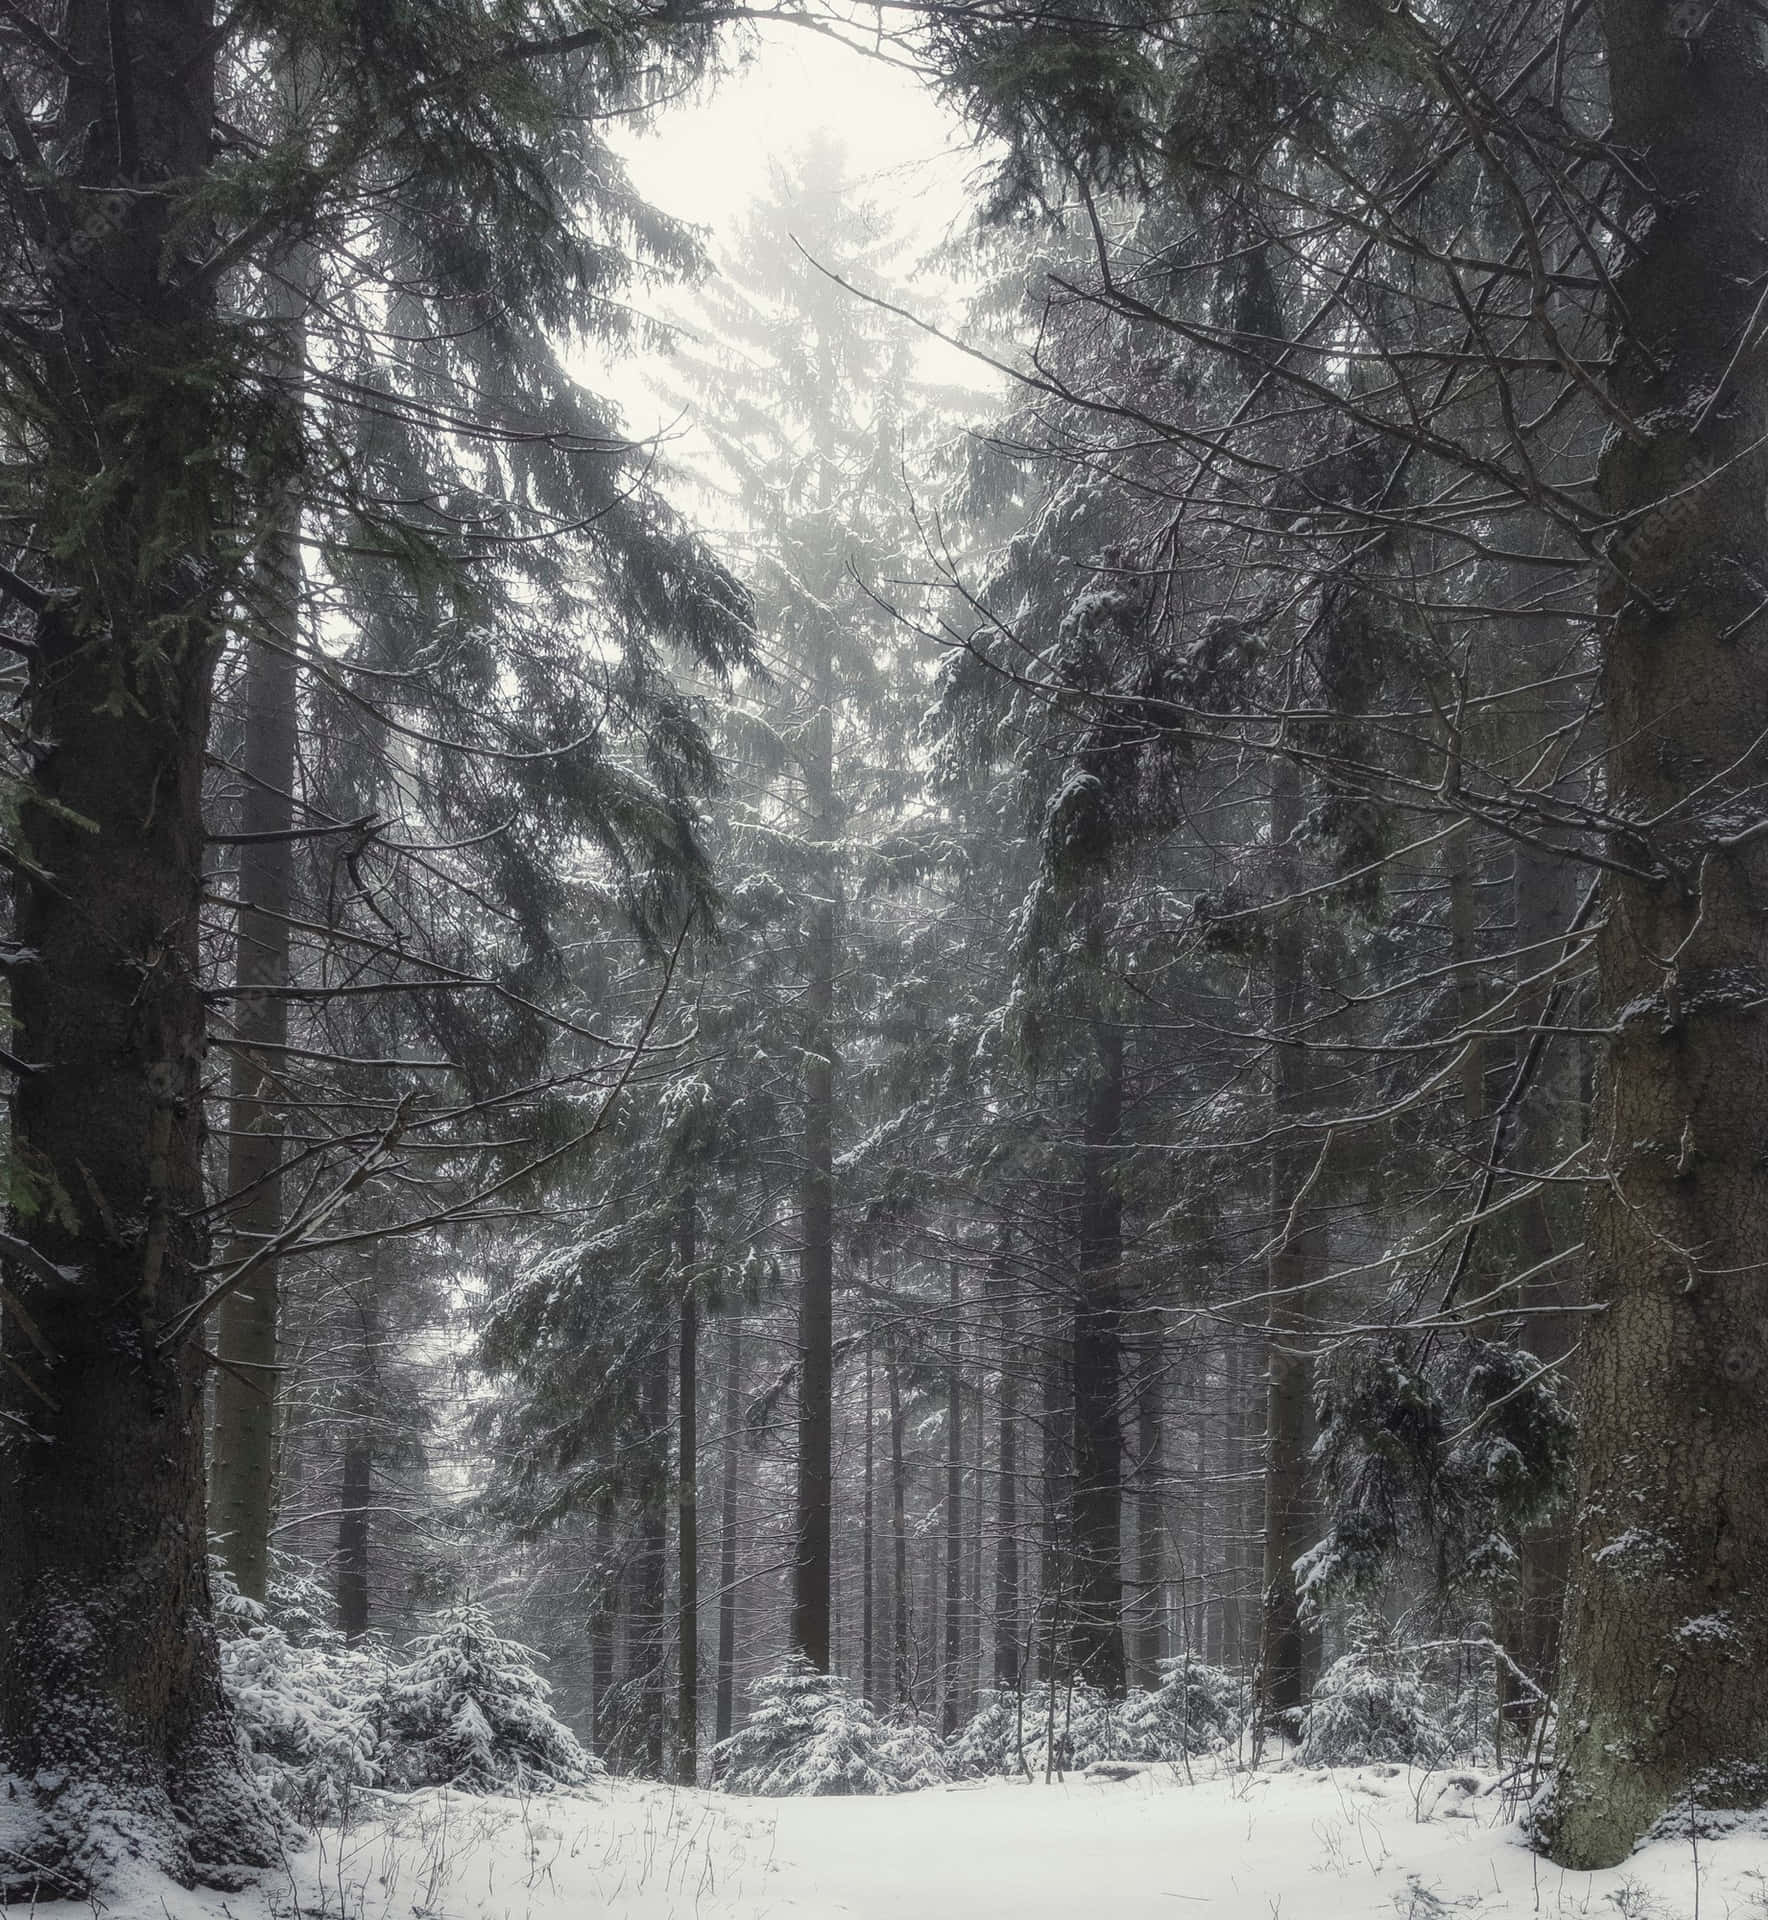 Winter Wonderland - A Snowy Forest as Far as the Eye Can See